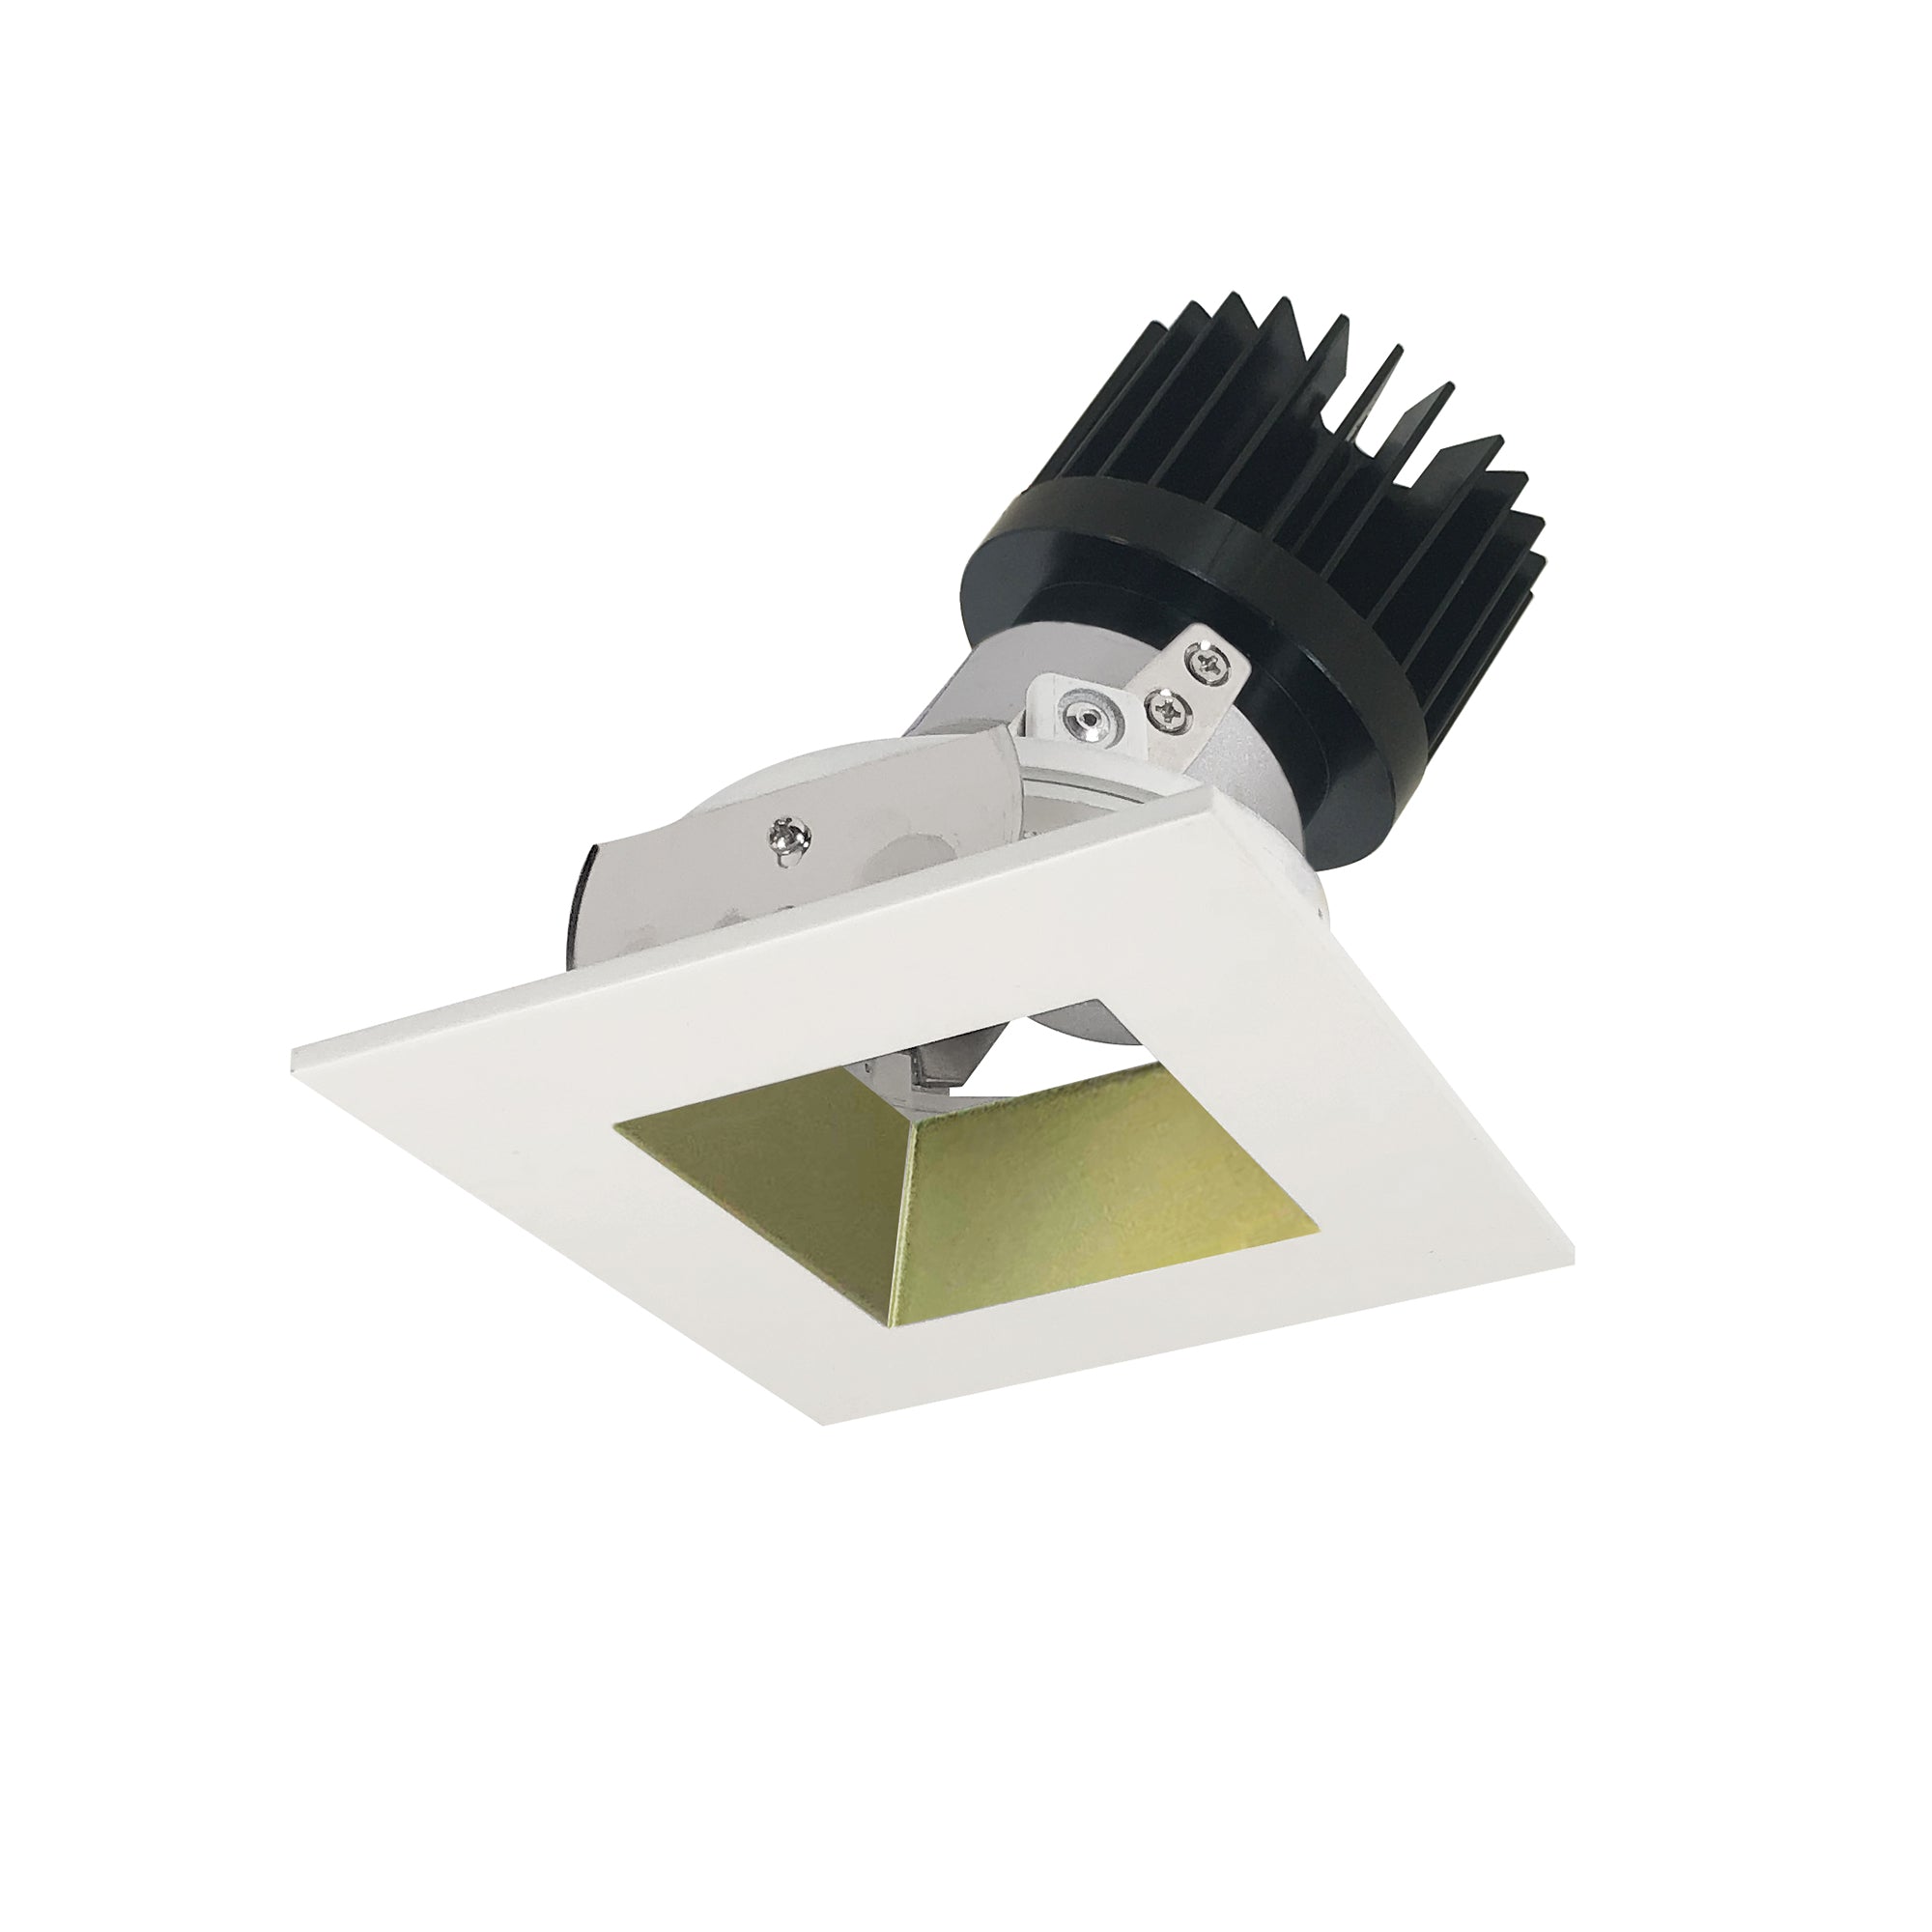 Nora Lighting NIO-4SDSQ27XCHMPW/HL 4" Iolite LED Square Adjustable Reflector With Square Aperture, 1500lm/2000lm (varies by housing), 2700K - Champagne Haze Reflector / Matte Powder White Flange